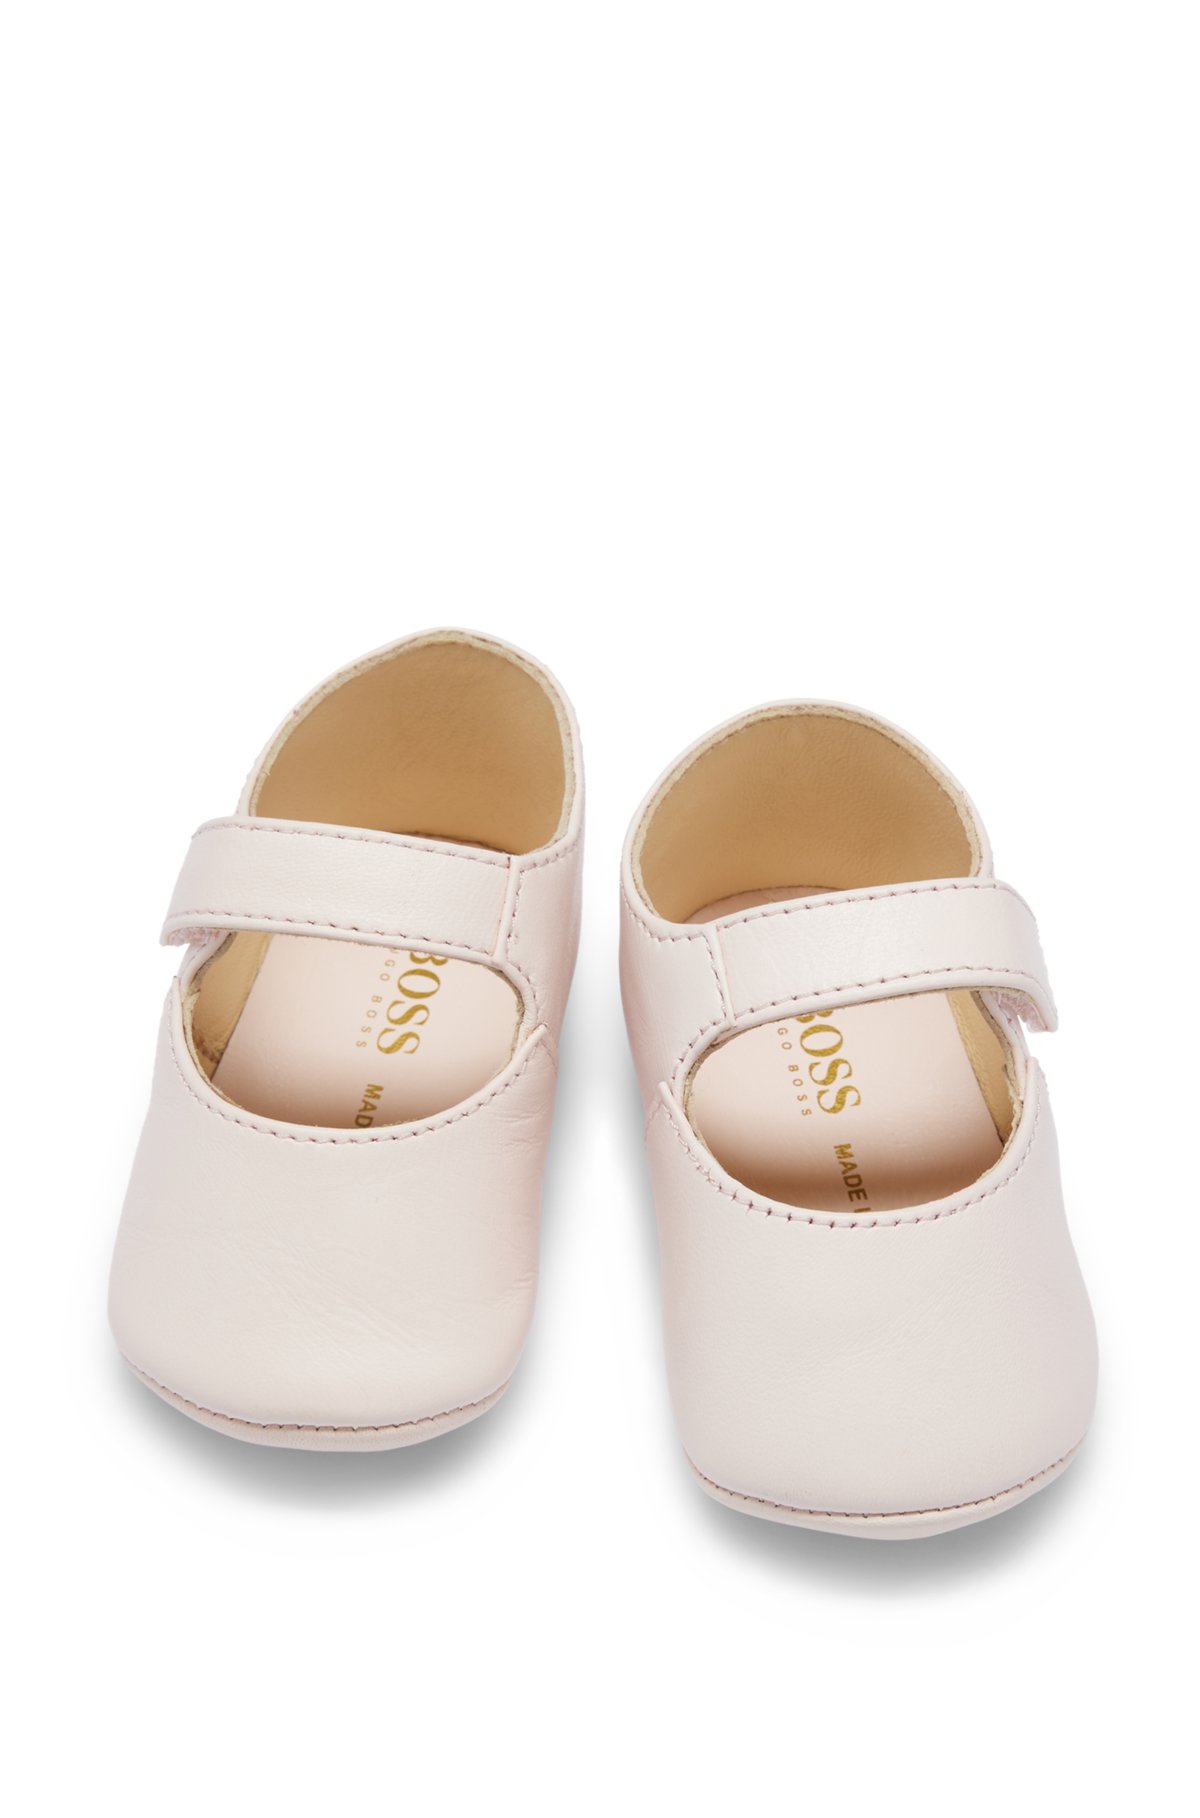 eskalere analog dannelse BOSS - Baby booties in soft leather with logo details